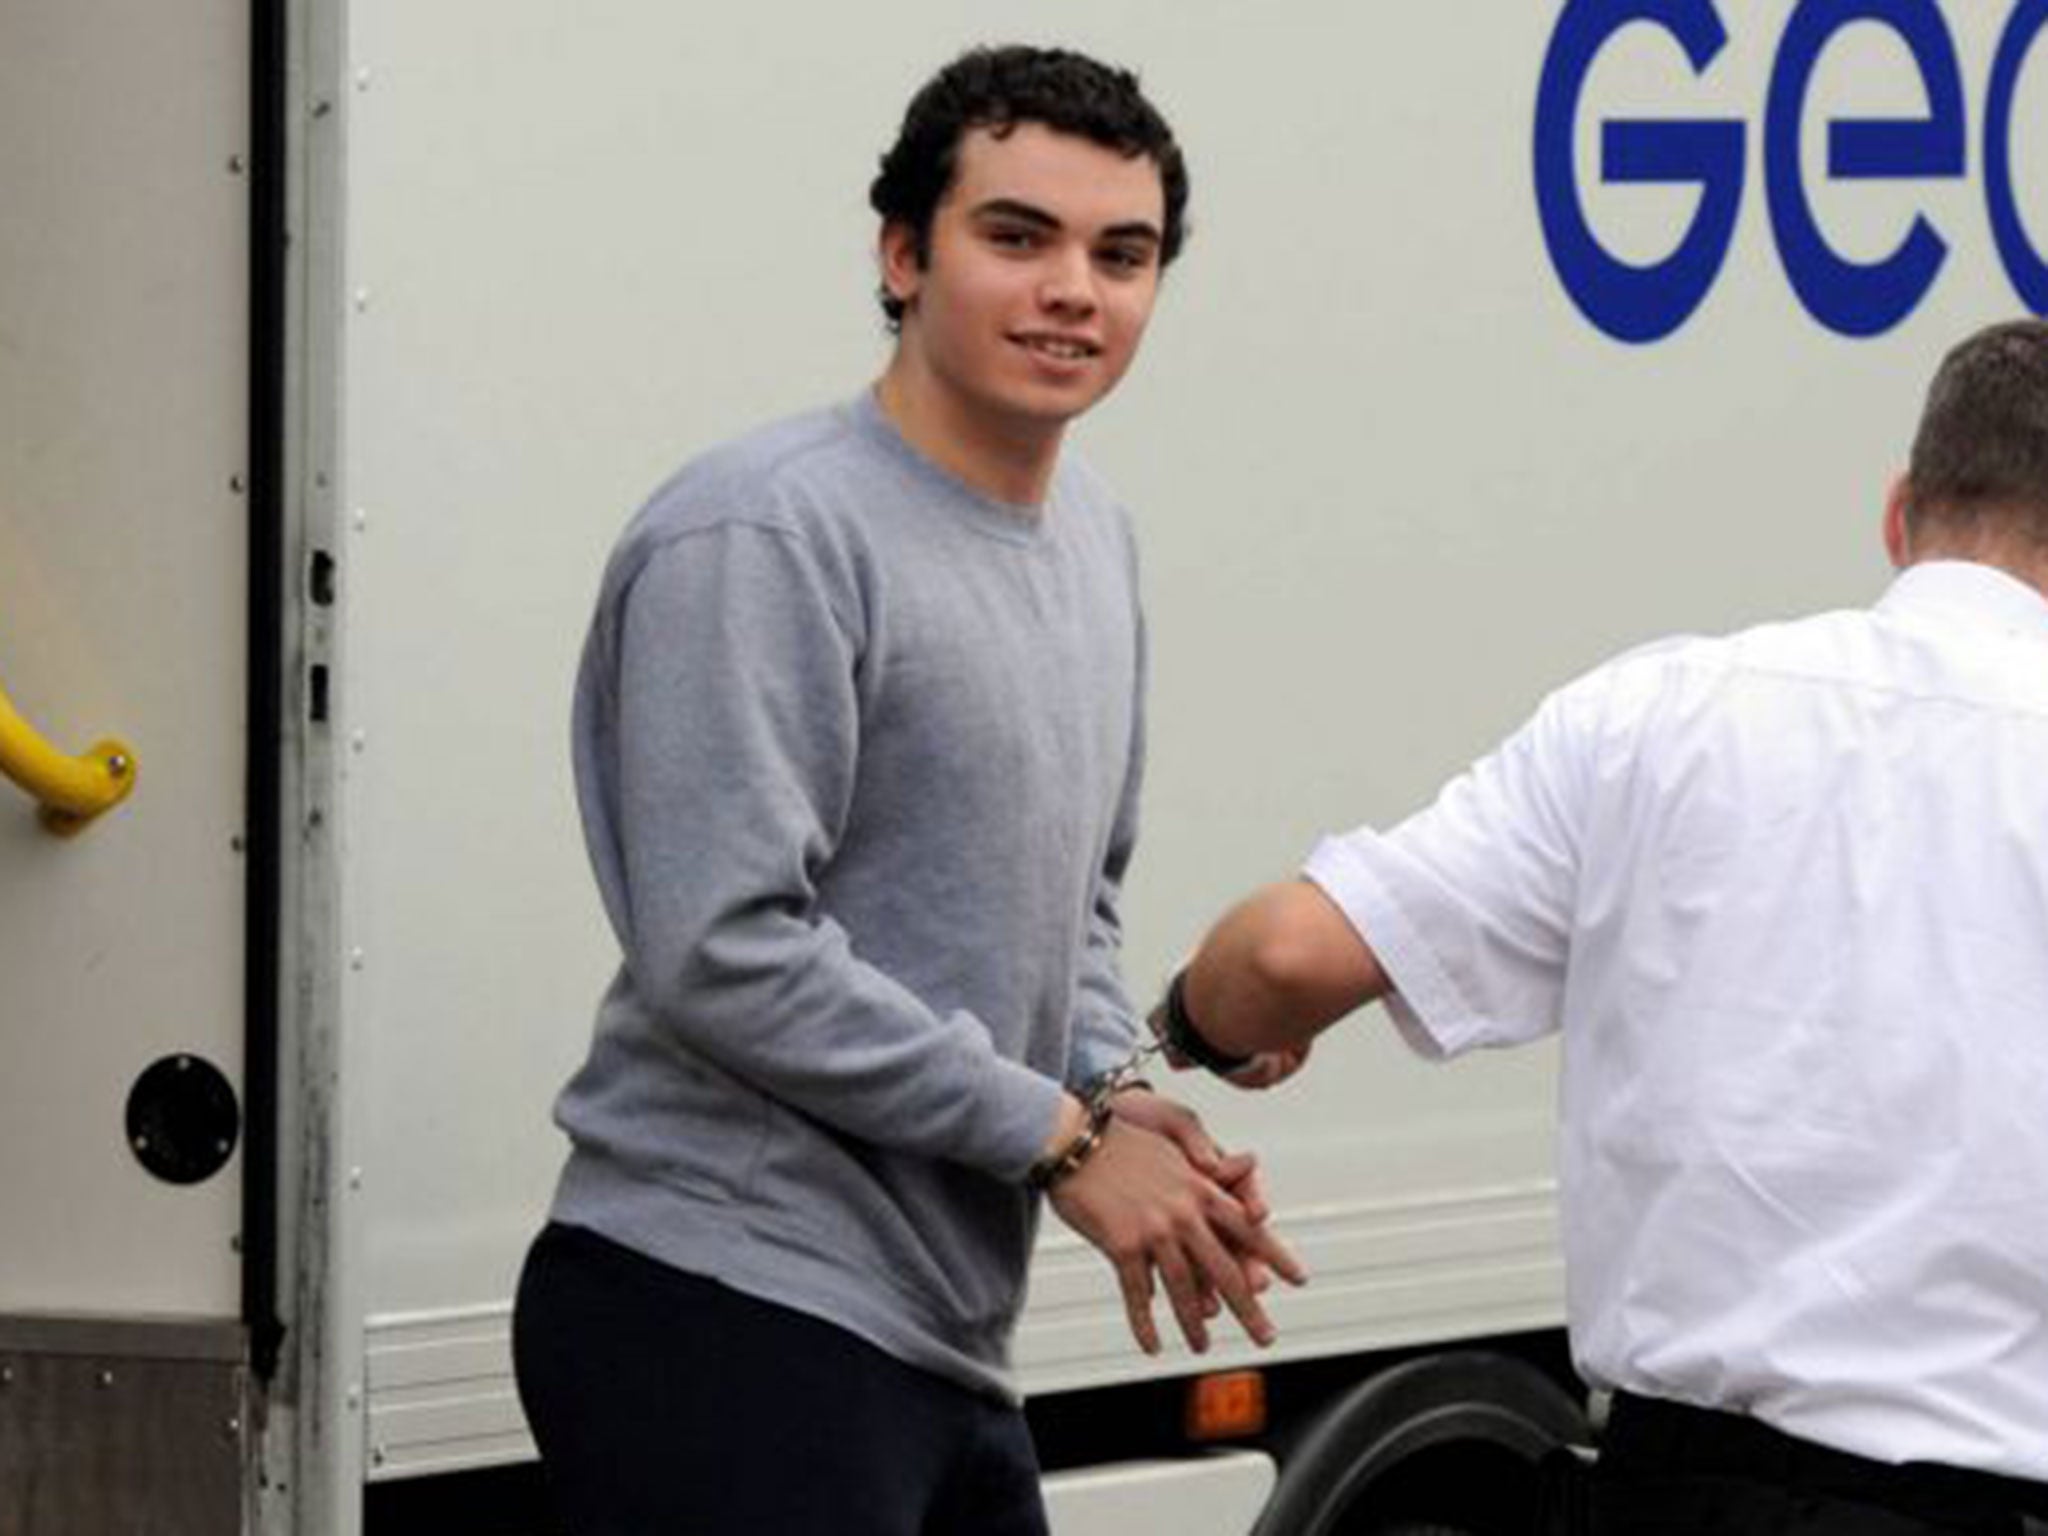 Liam Lyburd, 18, who is on trial over an alleged plan carry out a deadly attack on Newcastle College.